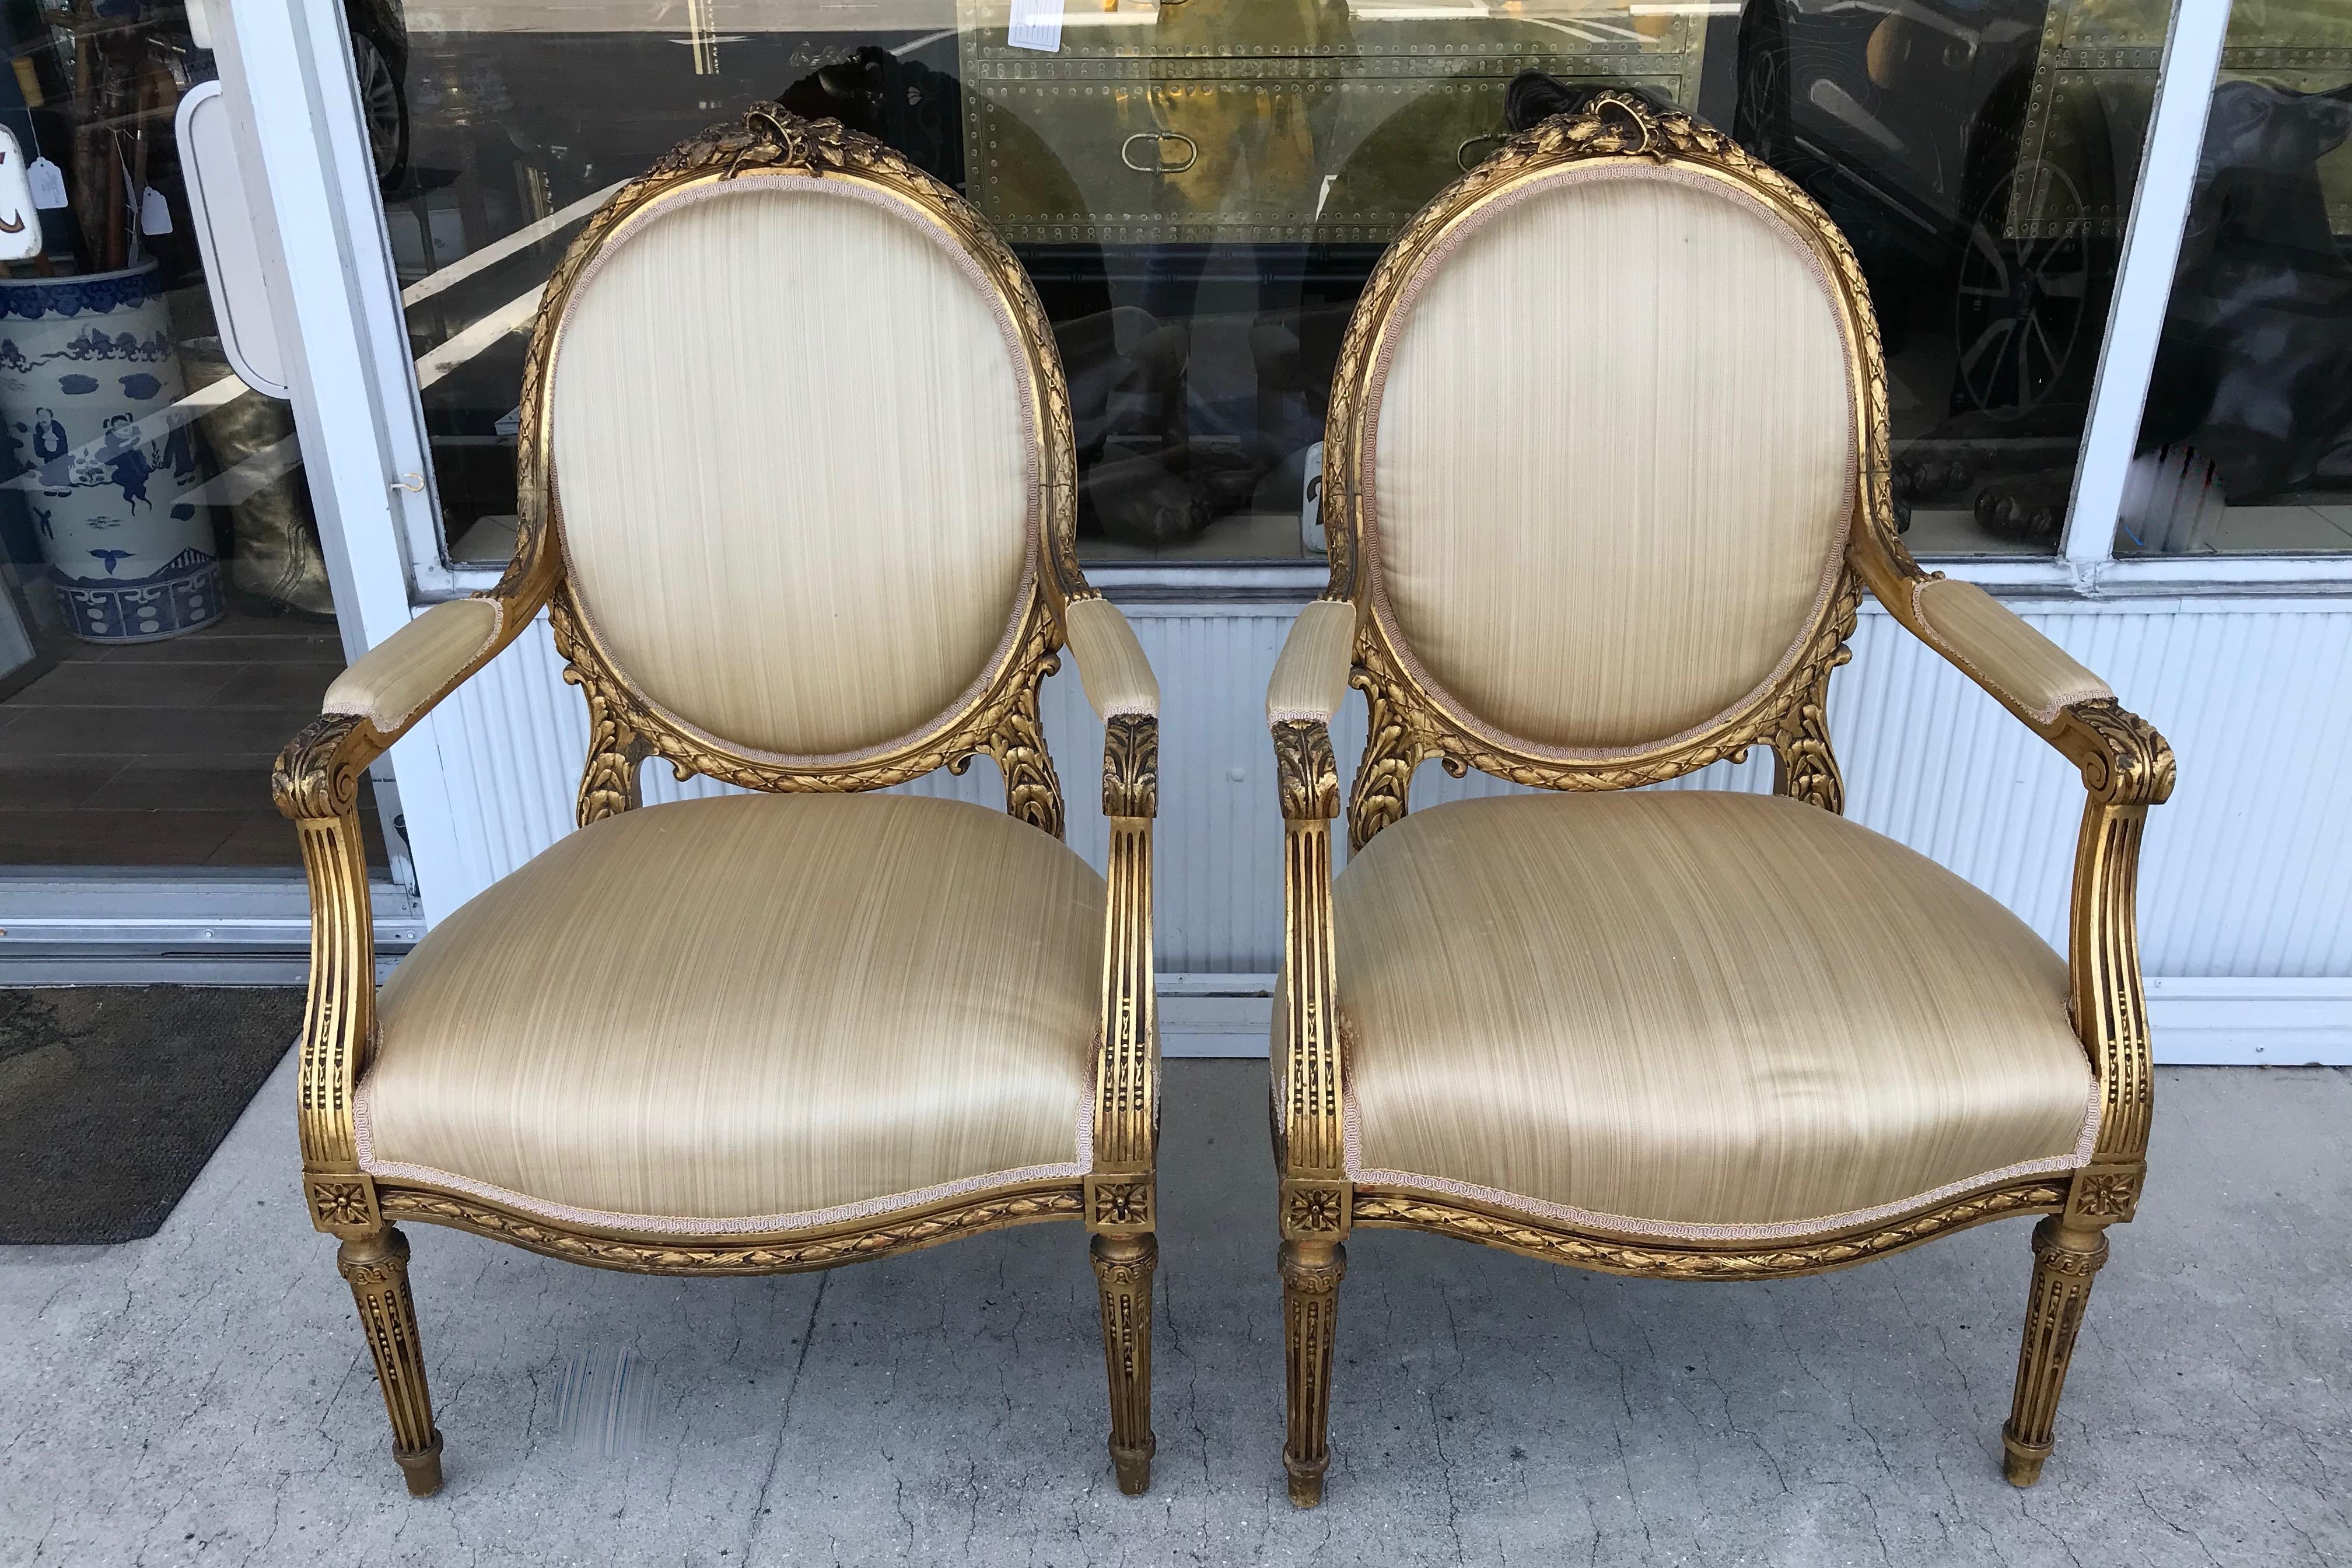 A stunning pair with fine acanthus leaf carving.
The chairs are raised upon reeded legs and are upholstered 
with silk. Superior quality - beautiful scale. A superb pair.